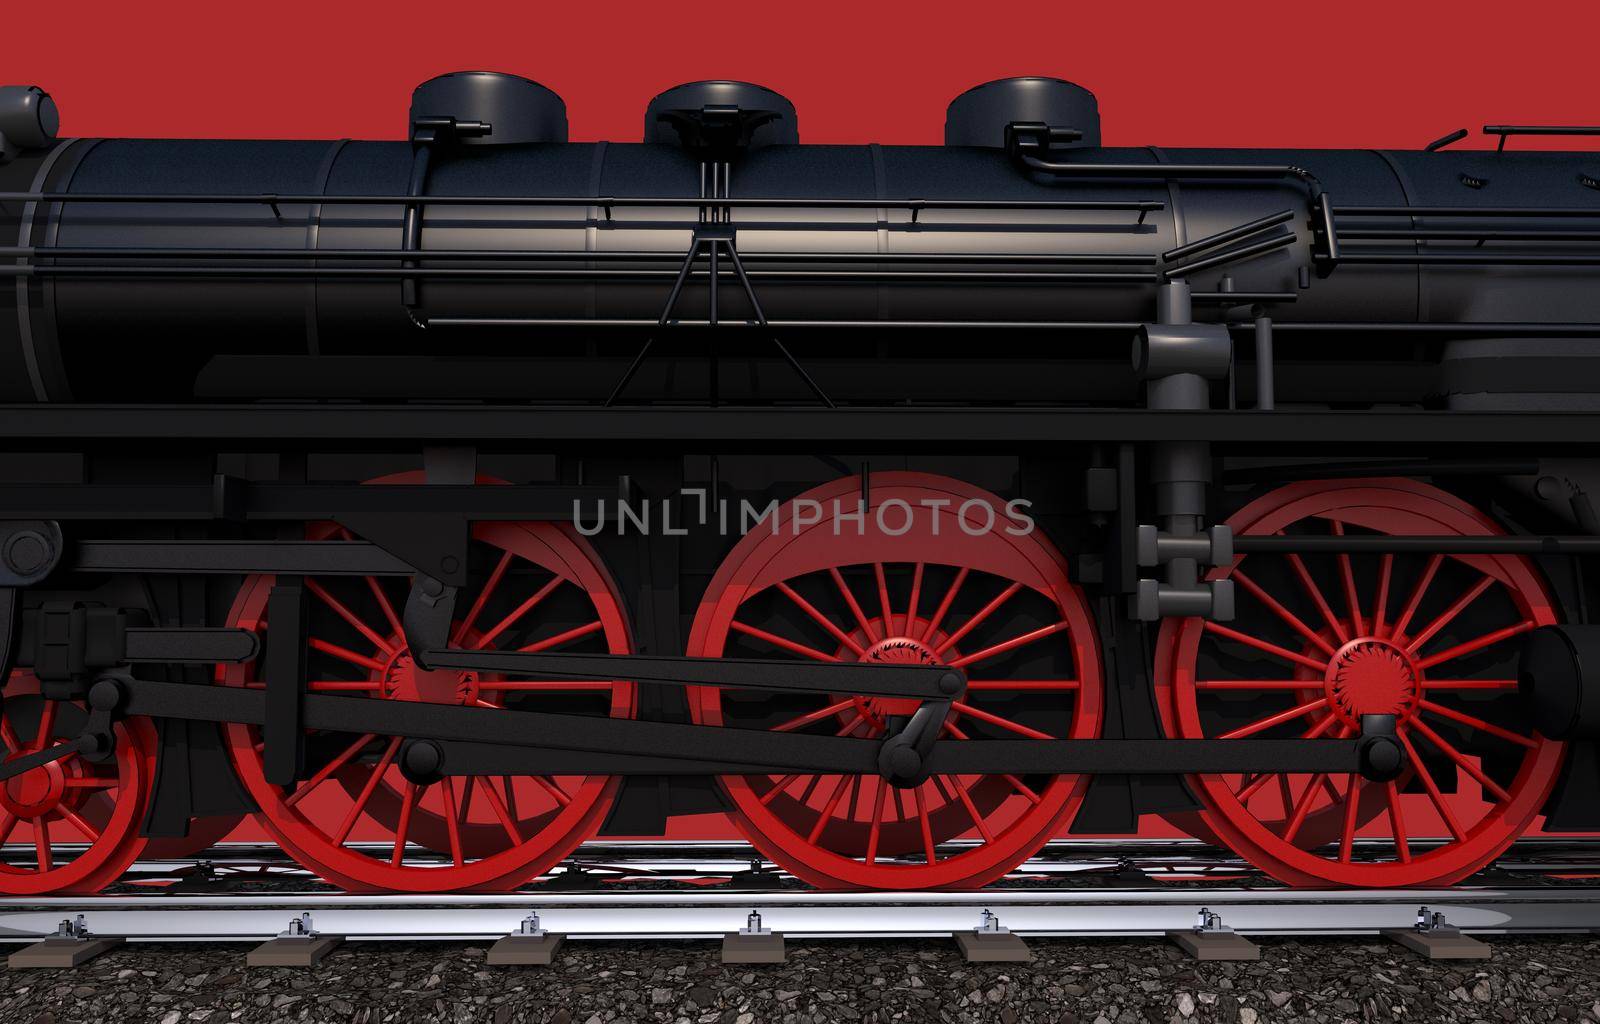 Steam Locomotive Wheels Closeup Illustration on Red Background.  by welcomia